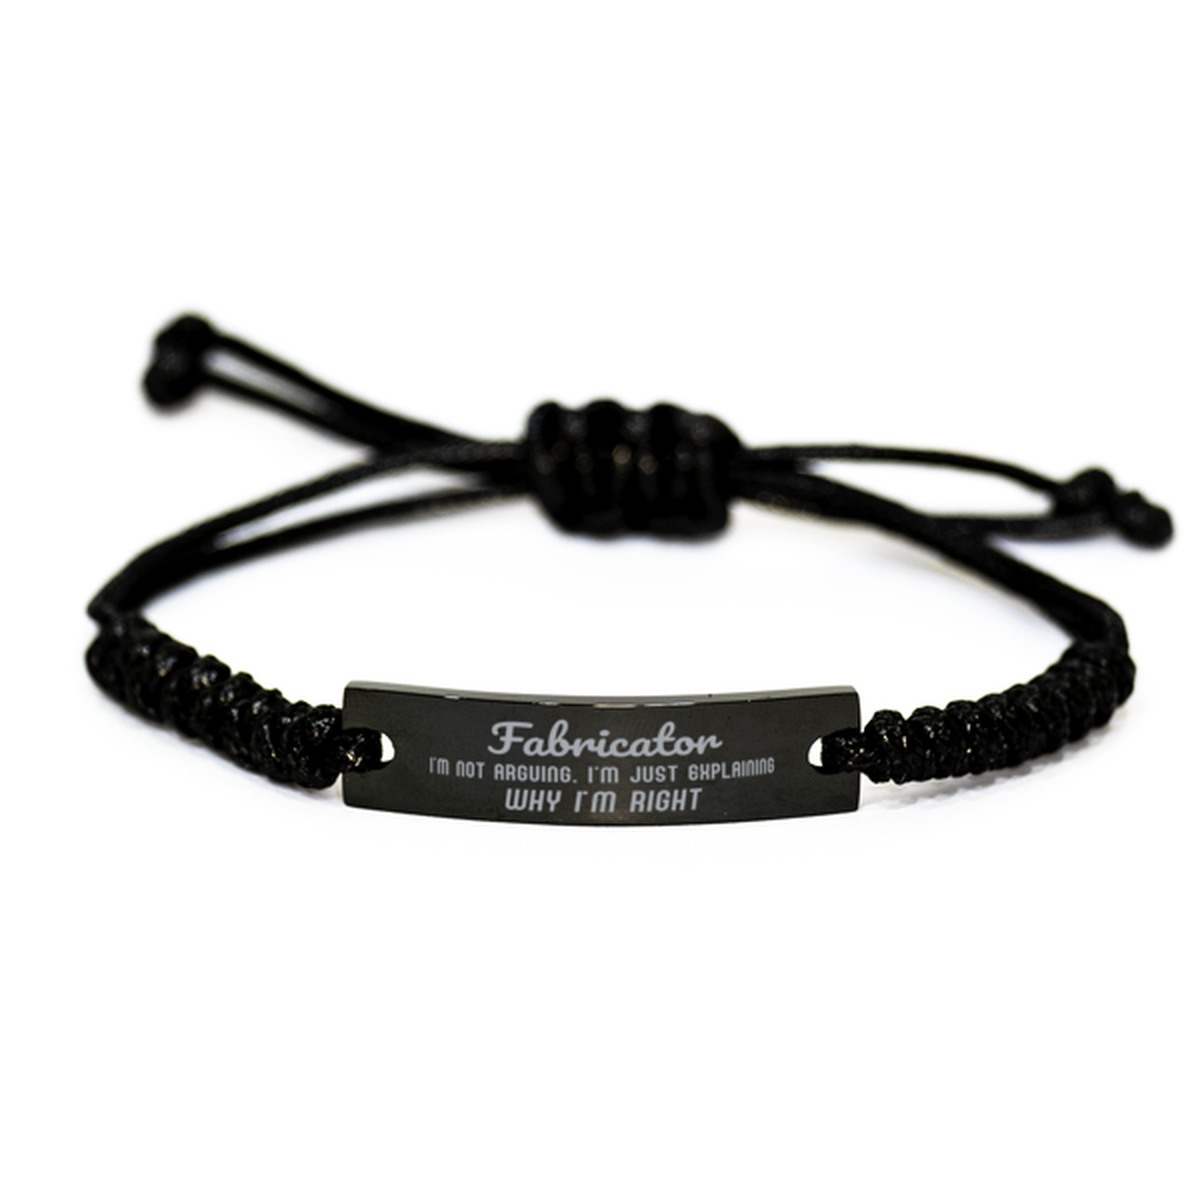 Fabricator I'm not Arguing. I'm Just Explaining Why I'm RIGHT Black Rope Bracelet, Funny Saying Quote Fabricator Gifts For Fabricator Graduation Birthday Christmas Gifts for Men Women Coworker